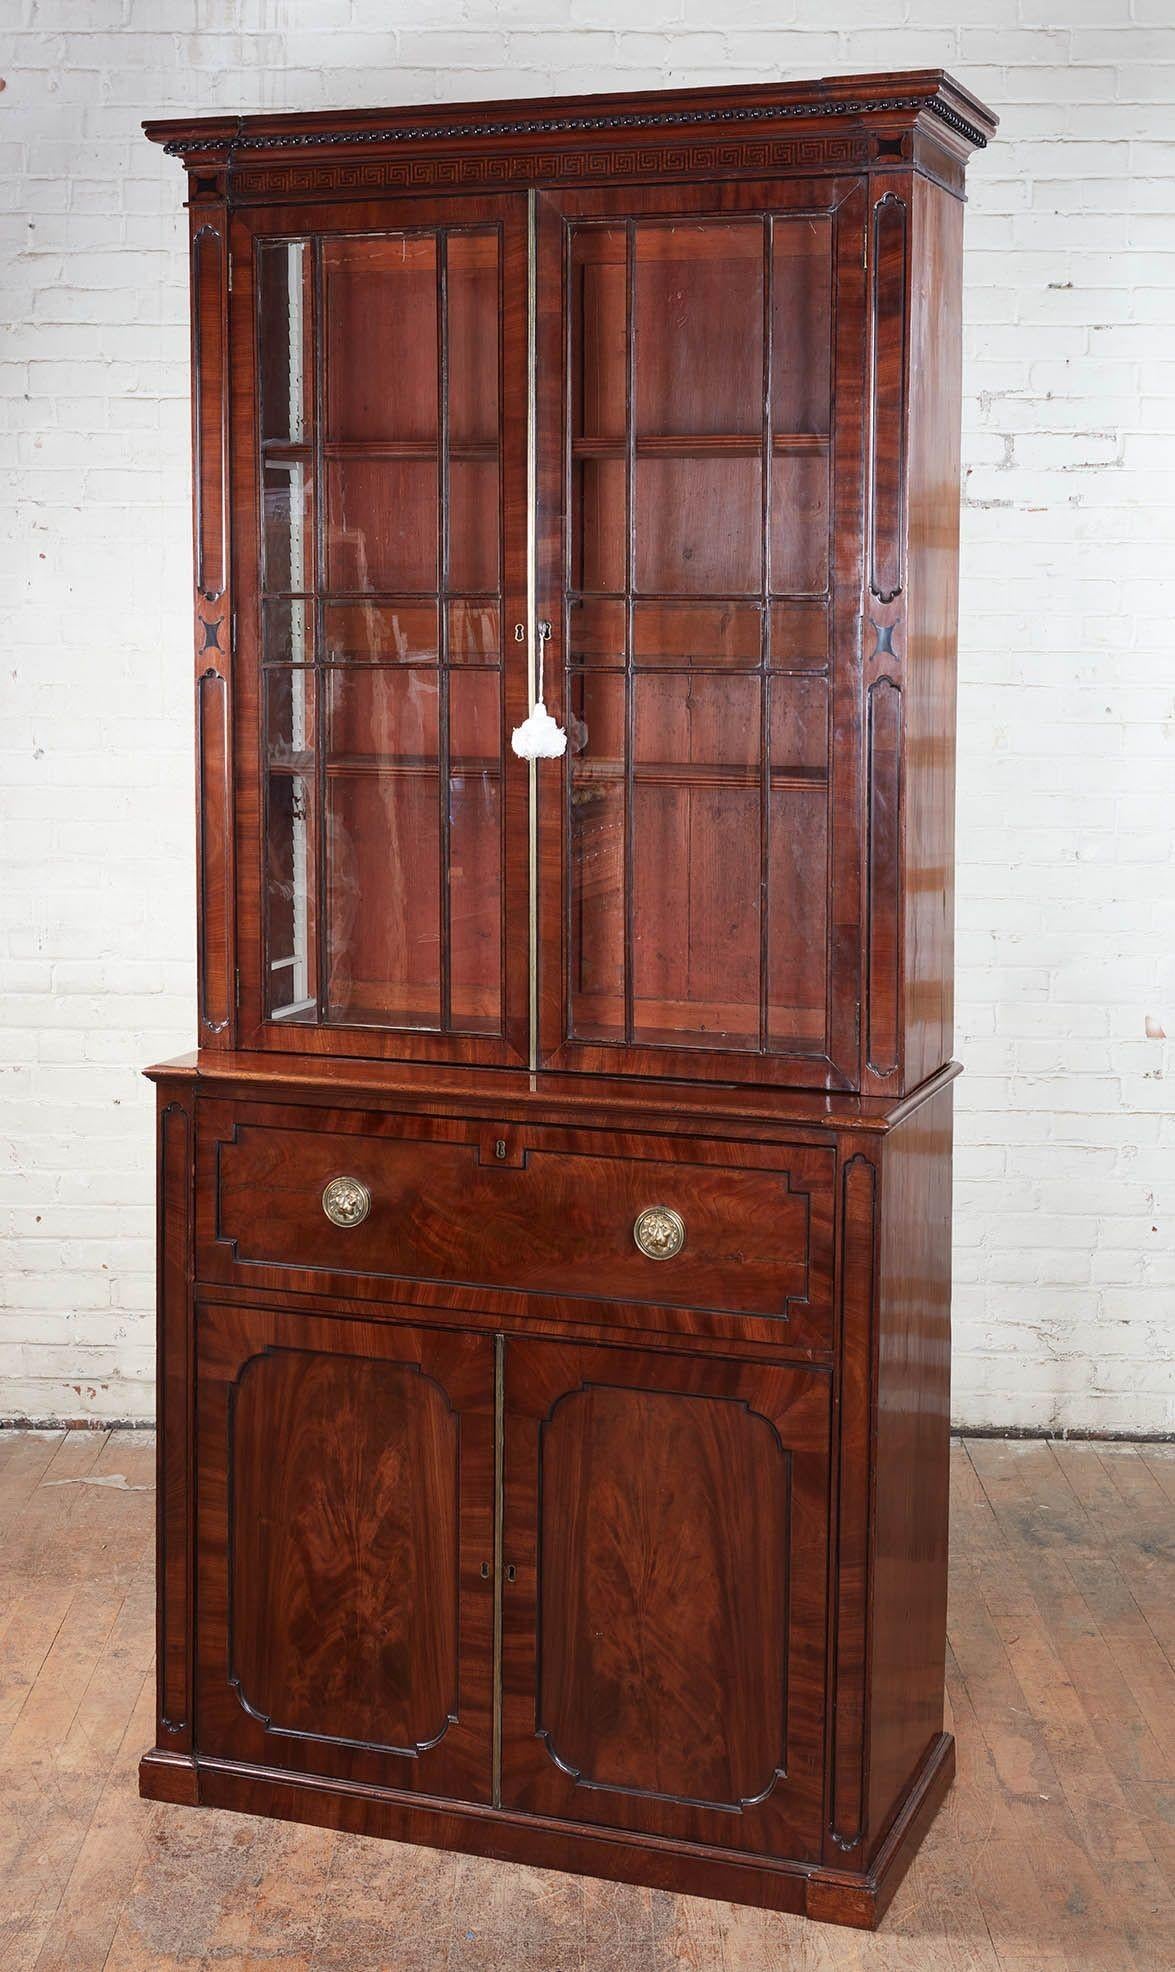 Very fine Regency period mahogany bookcase cabinet with secretary drawer, the molded cornice with ebonized ball drops over two astragal glazed doors over satinwood fitted pull out secretary drawer with original pull and with wonderful lion mask